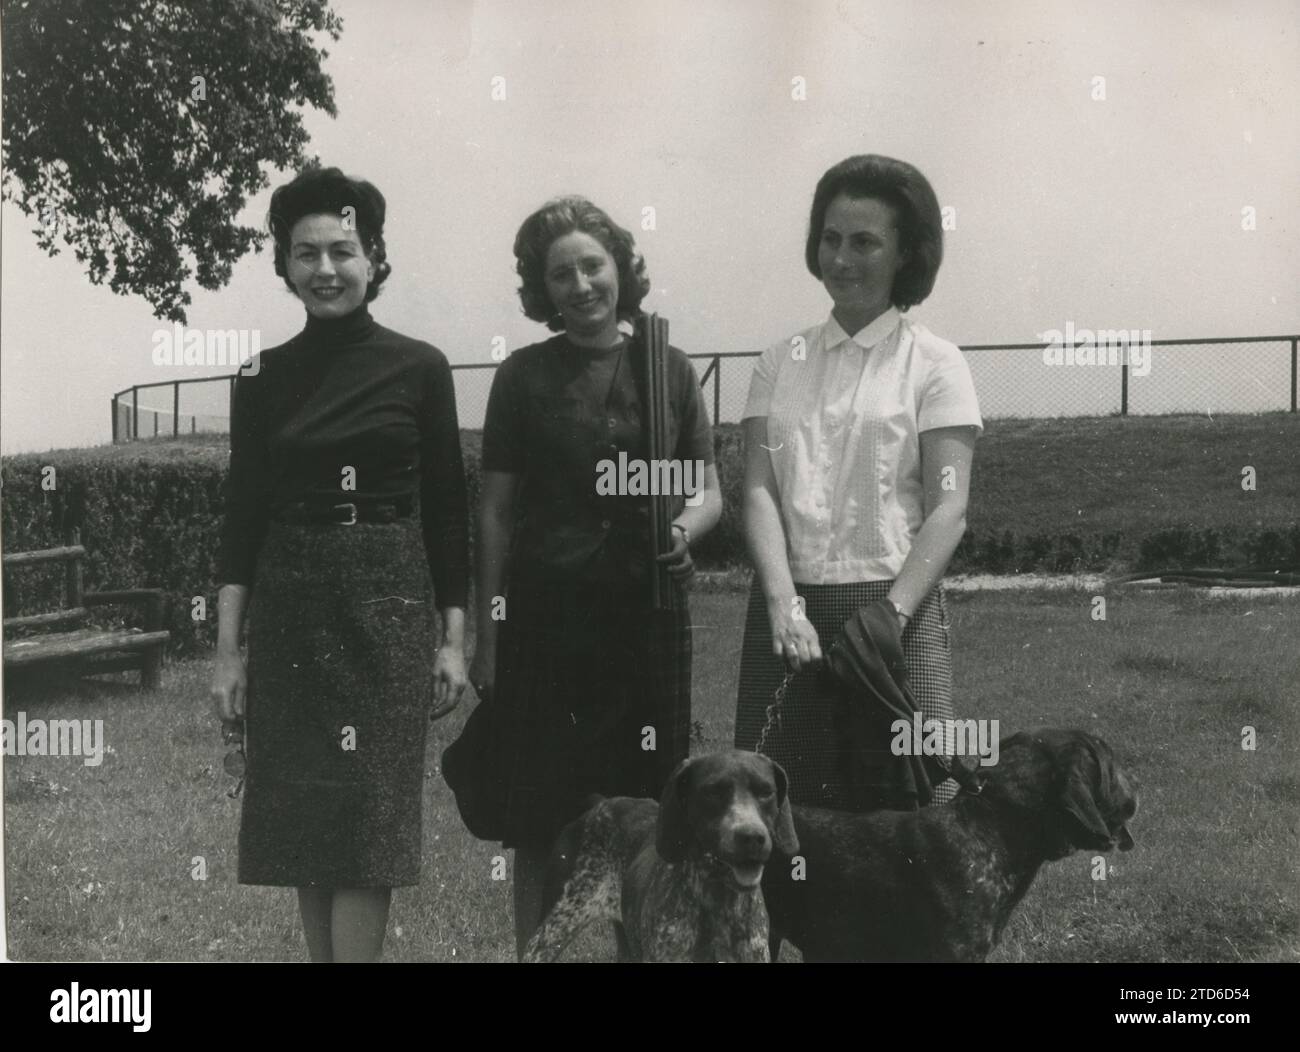 Madrid, April 1963. XXVII World Pigeon Shooting Championship. In the image, the world champions in other editions, the North American Carola Mandel and the Spanish María Antonia Morenés, together with Mrs. de Irujo. Credit: Album / Archivo ABC / Manuel Menéndez Chacón Stock Photo